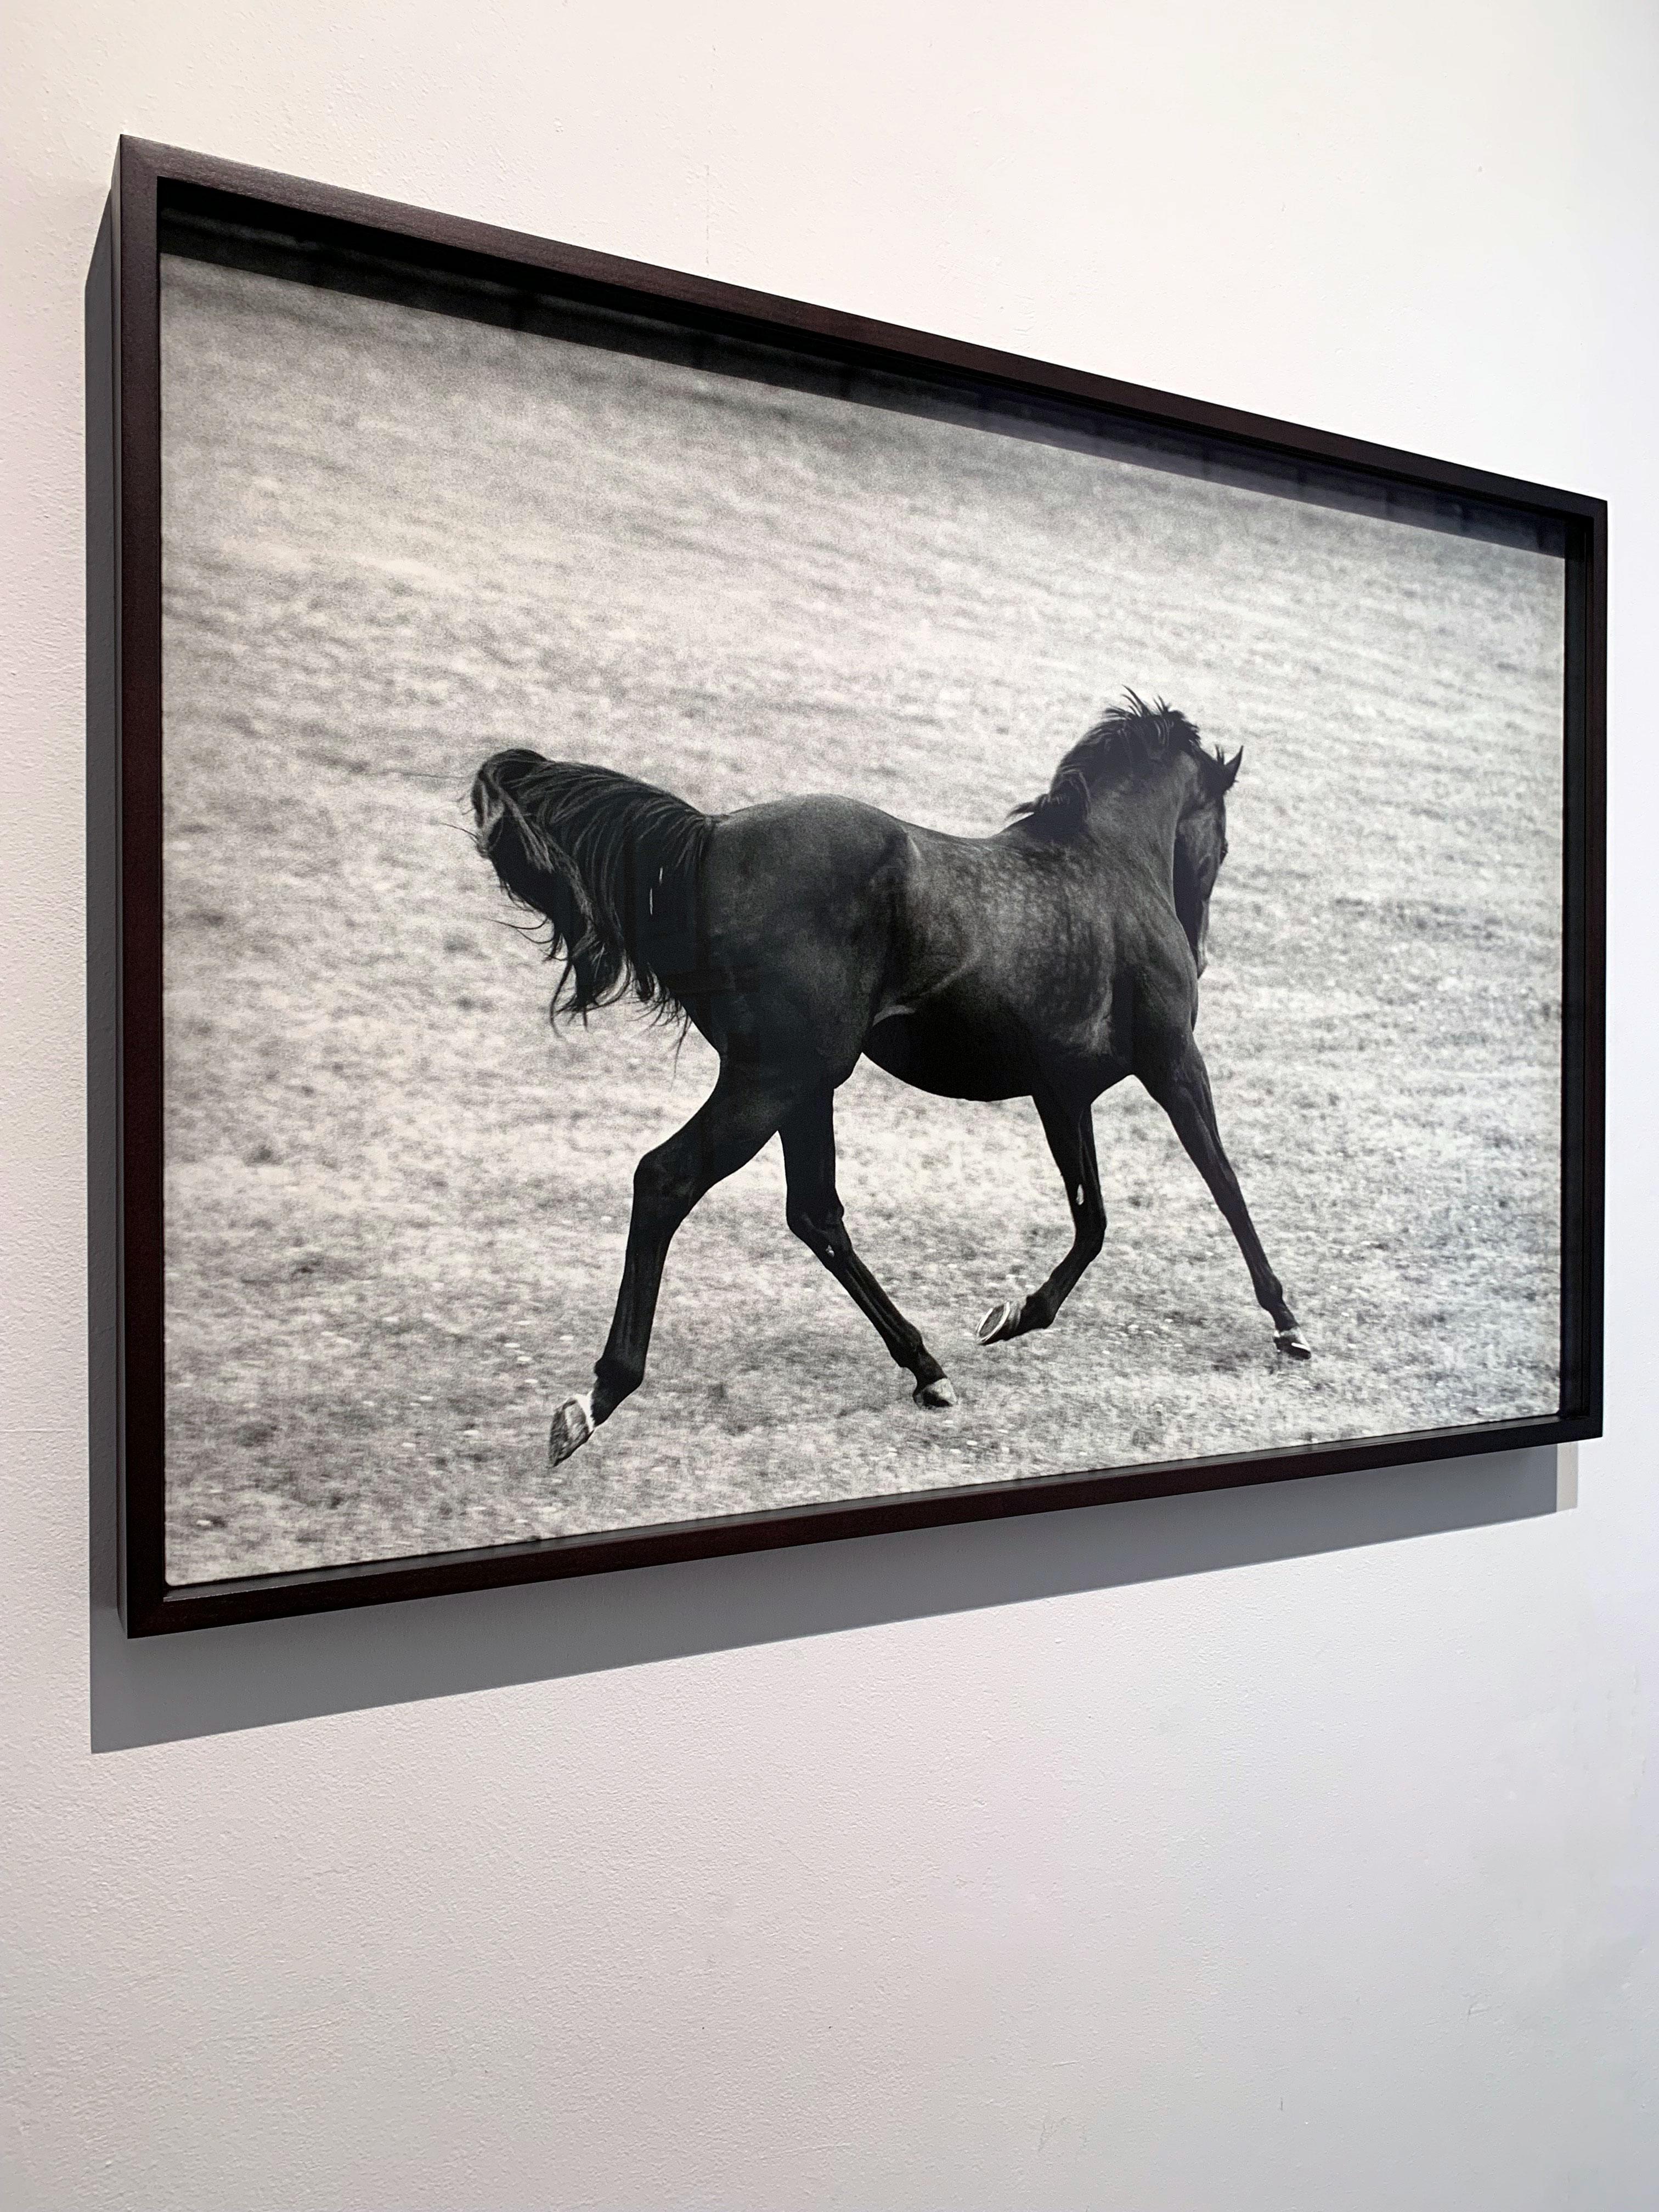 Singspiel, Stallion Portrait 2001 by John Reardon
76 x 51 cm
Edition of 5 only
Silver Gelatin Print, Mounted on Aluminium, Custom framed, UV protective Museum AR Glass

This piece is part of '(after) Whistlejacket' - Contemporary Equine Photographs